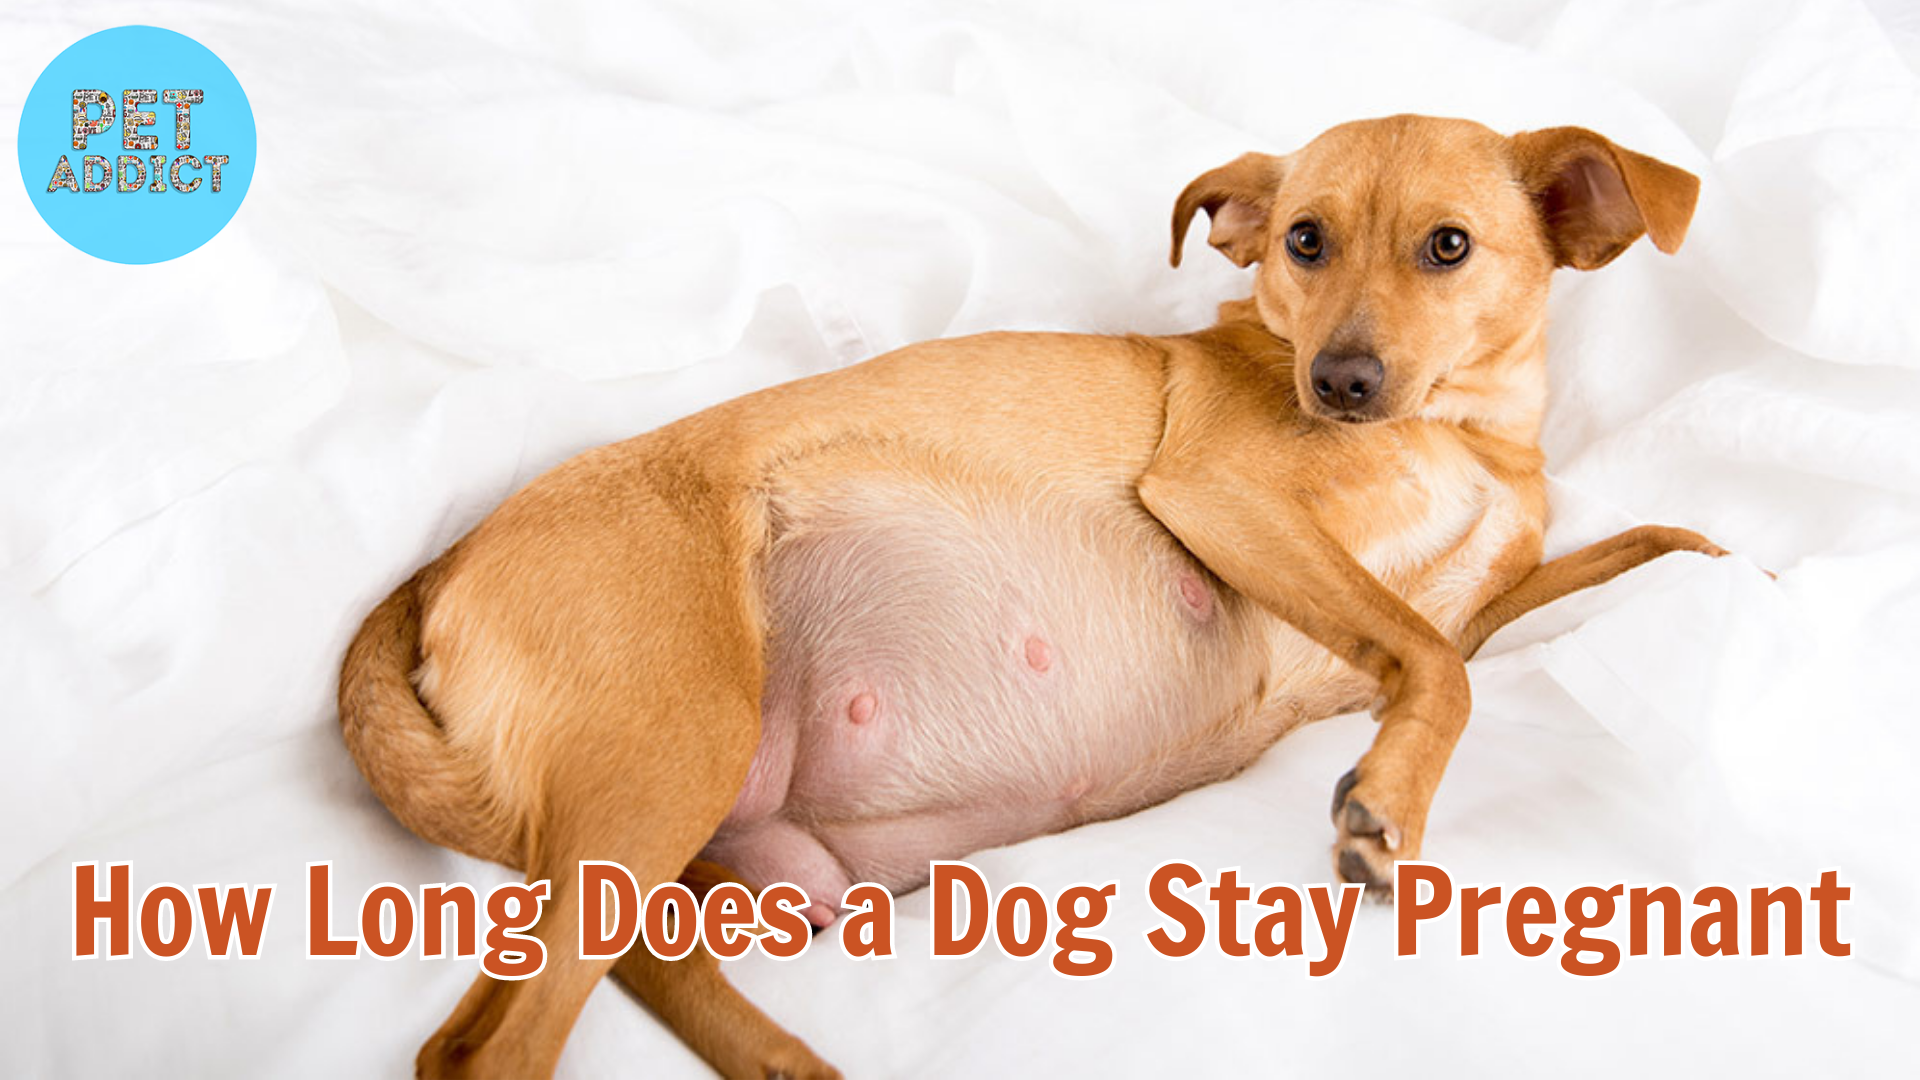 How Long Does a Dog Stay Pregnant? – Caring for Your Pregnant Dog